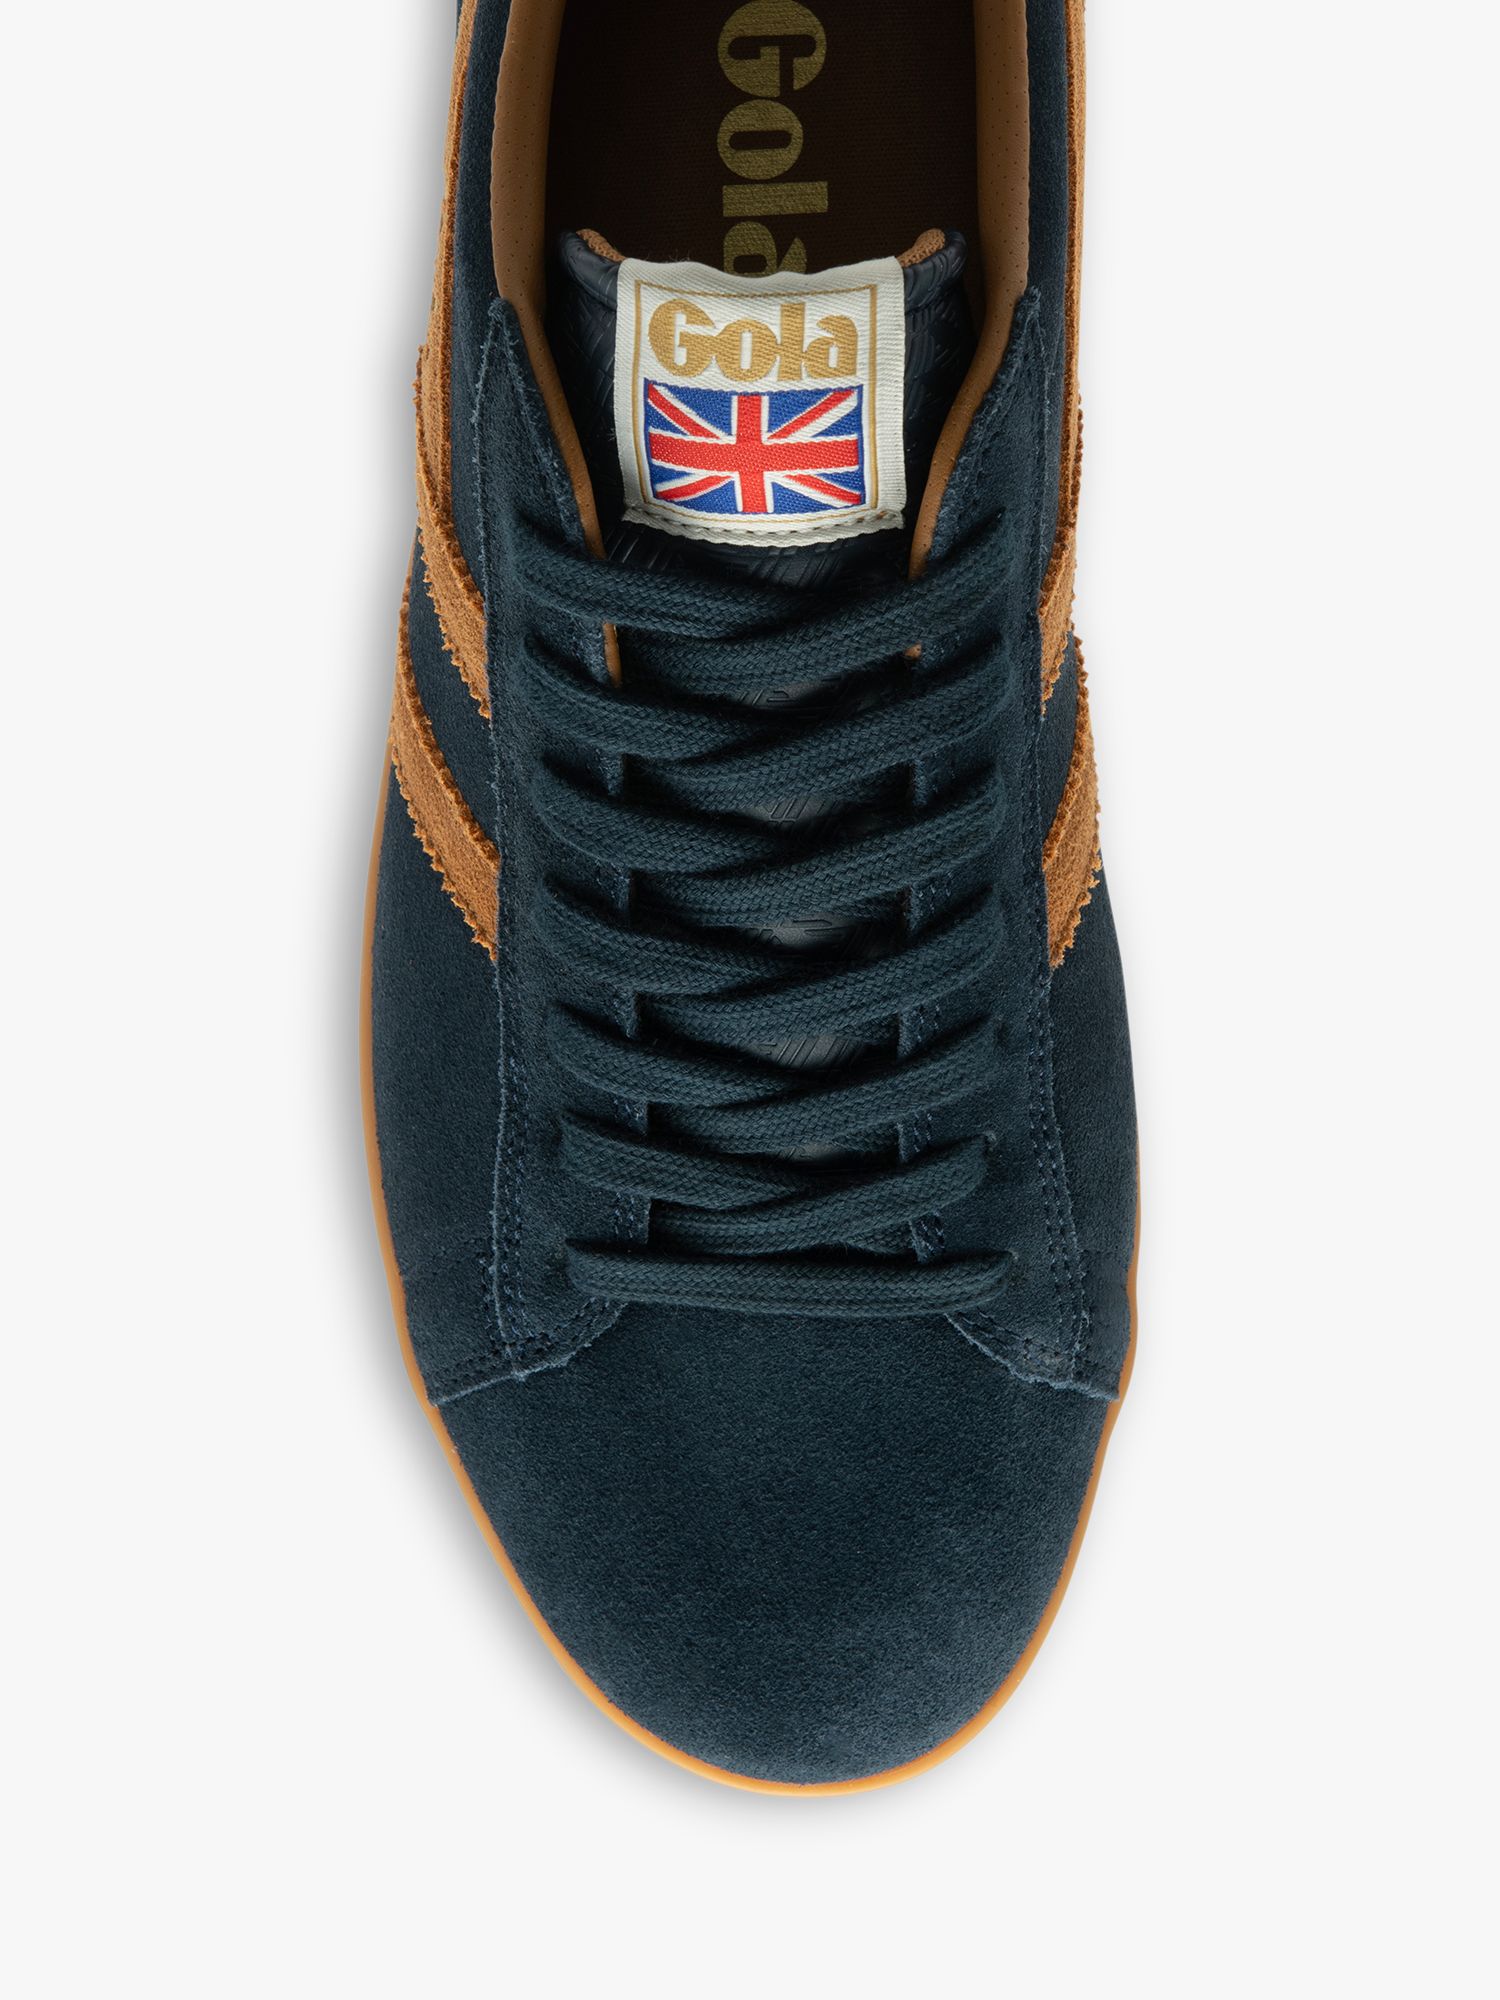 Buy Gola Classics Equipe Suede Lace Up Trainers, Navy/Ginger/Gum Online at johnlewis.com